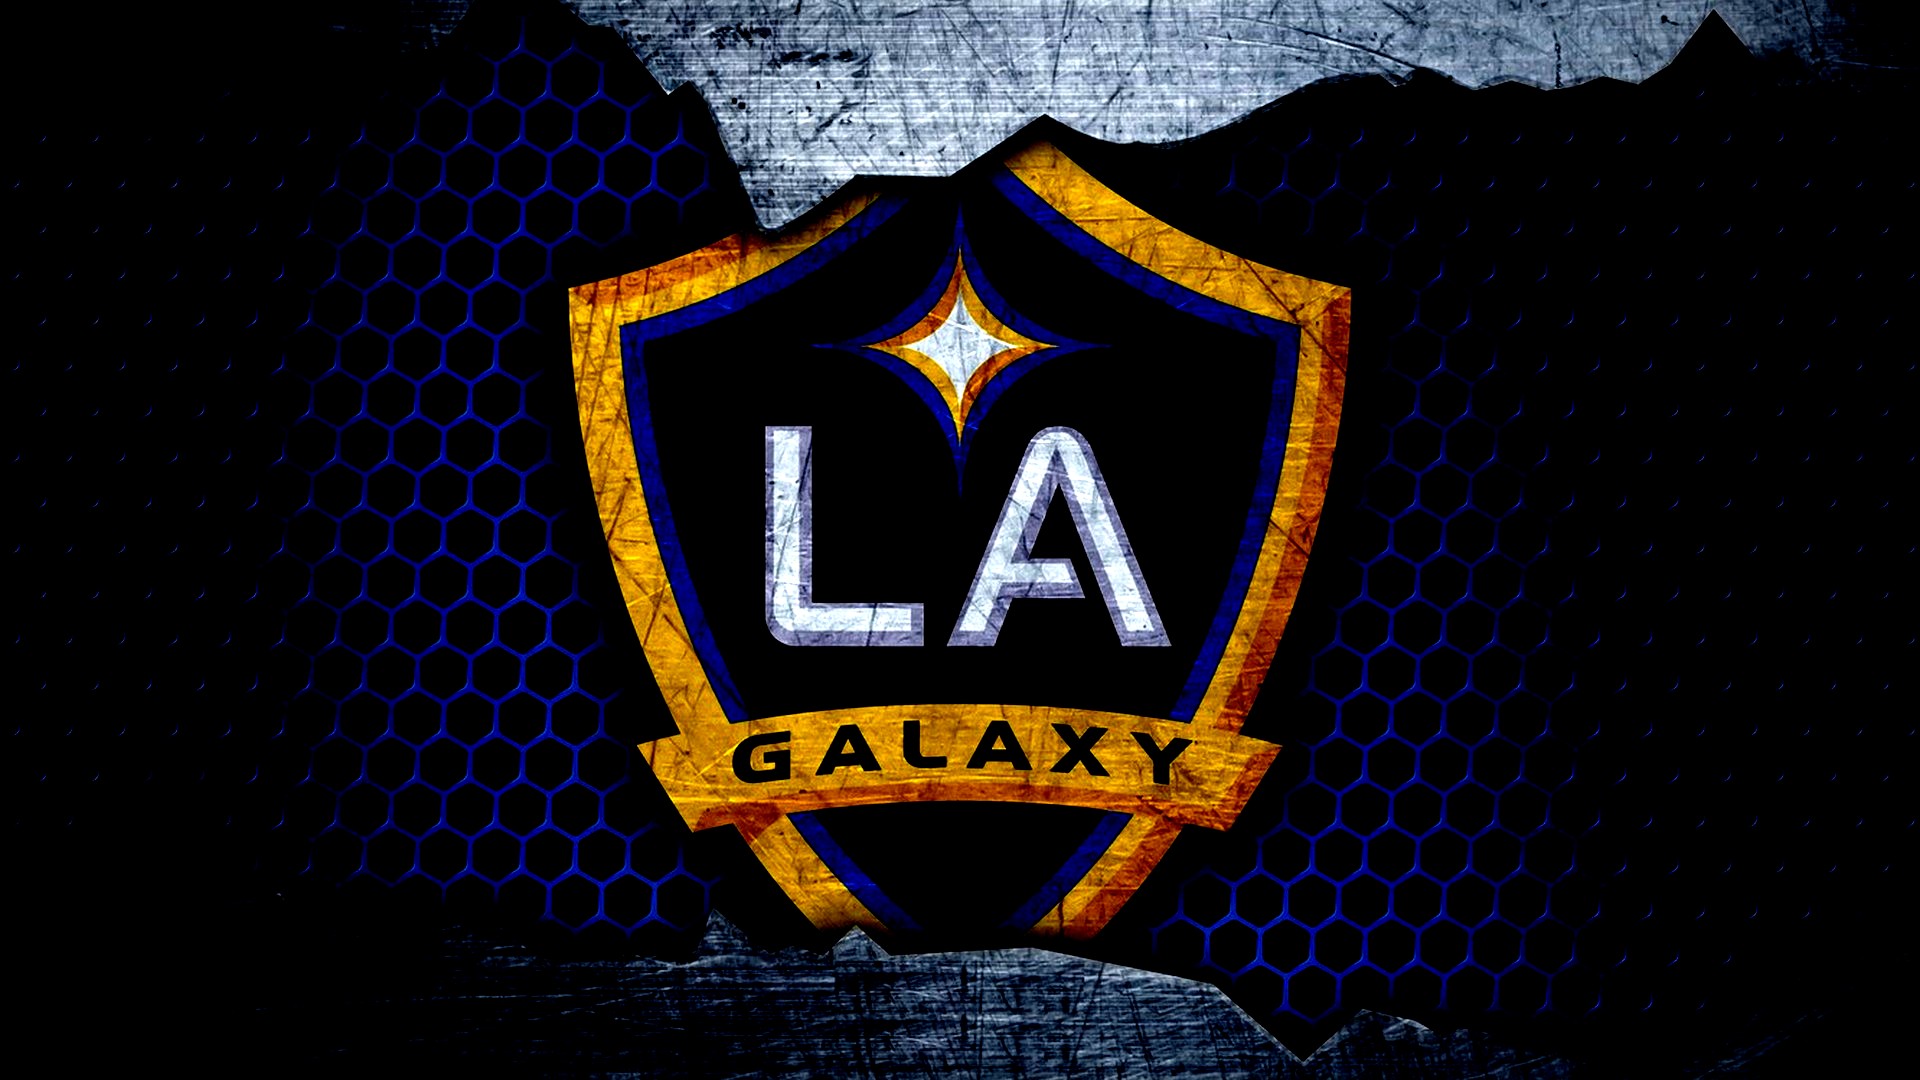 HD Desktop Wallpaper Los Angeles Galaxy with high-resolution 1920x1080 pixel. You can use this wallpaper for your Desktop Computers, Mac Screensavers, Windows Backgrounds, iPhone Wallpapers, Tablet or Android Lock screen and another Mobile device